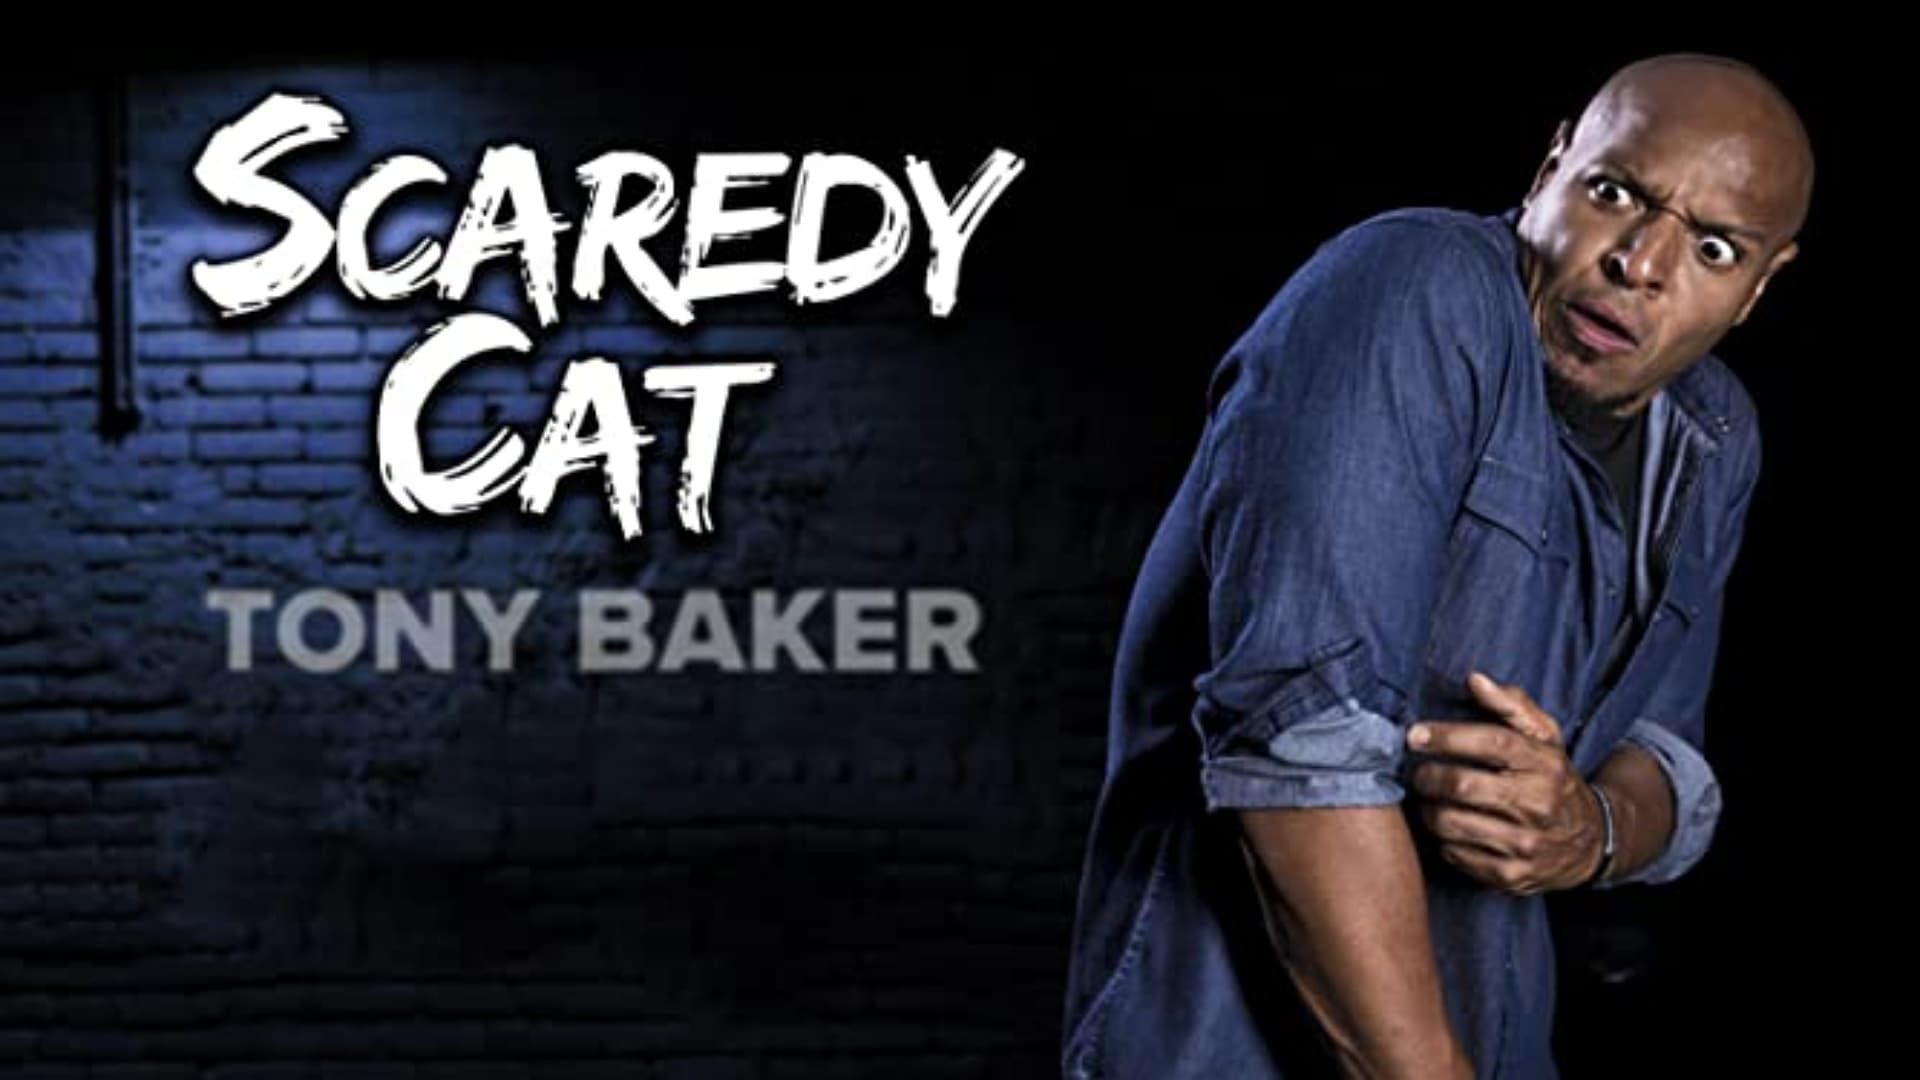 Scaredy Cats: Where to Watch and Stream Online